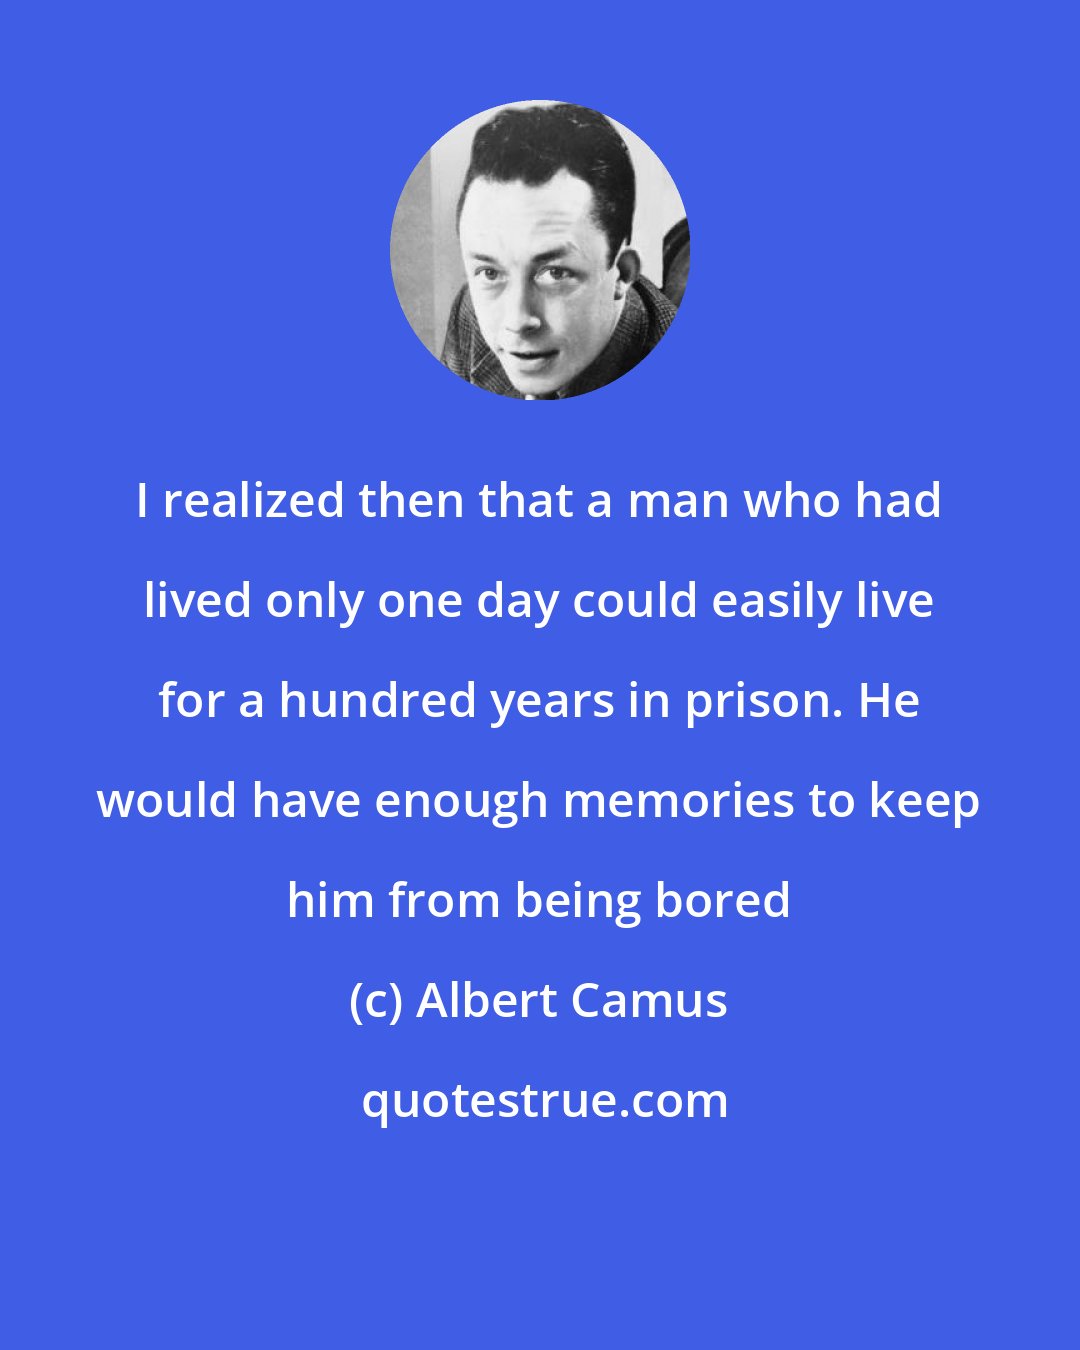 Albert Camus: I realized then that a man who had lived only one day could easily live for a hundred years in prison. He would have enough memories to keep him from being bored